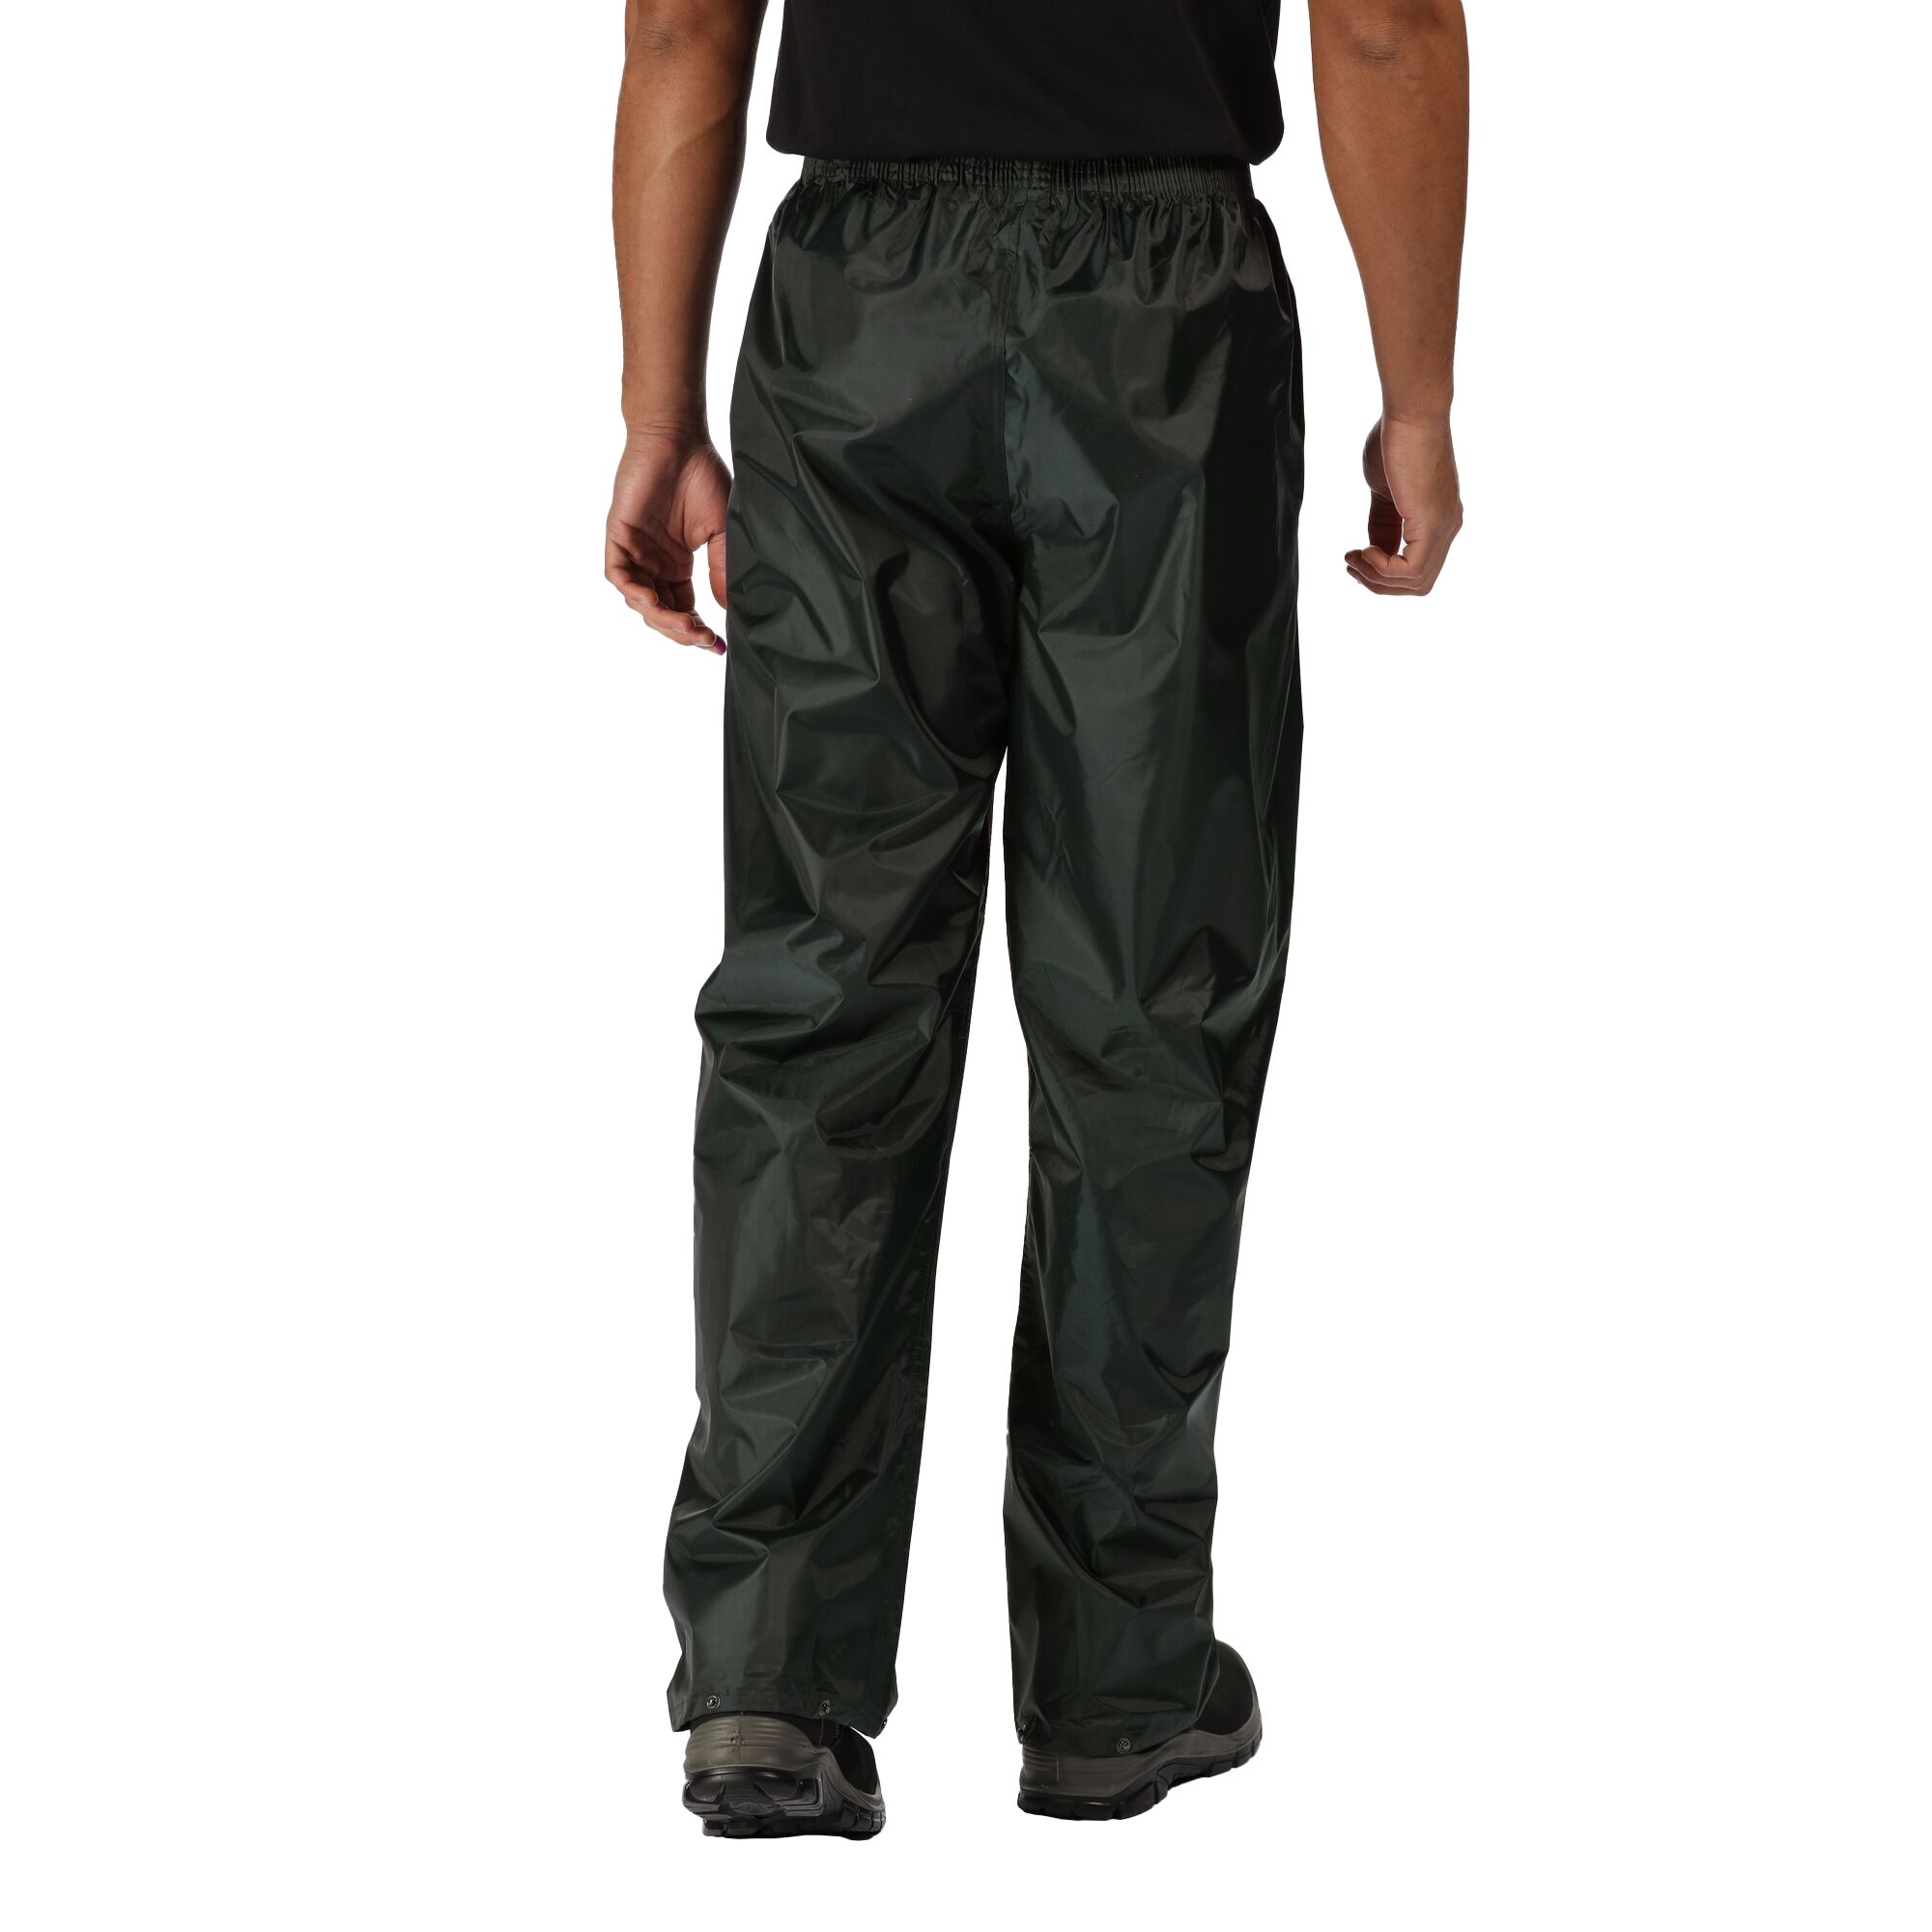 100% Hydrafort 5000 polyester. Mens overtrousers. Windproof fabric. Taped seams. Elasticated waist. Press studs at hem. 2 side pocket openings. Regatta Professional Mens sizing (waist approx): XS (28-30in/71-76cm), S (32in/81cm), M (33-34in/84-86cm), L (36in/92cm), XL (38-40in/97-102cm), XXL (42-44in/107-122cm), XXXL (46-48in/117-122cm), XXXXL (50-52in/127-132cm).